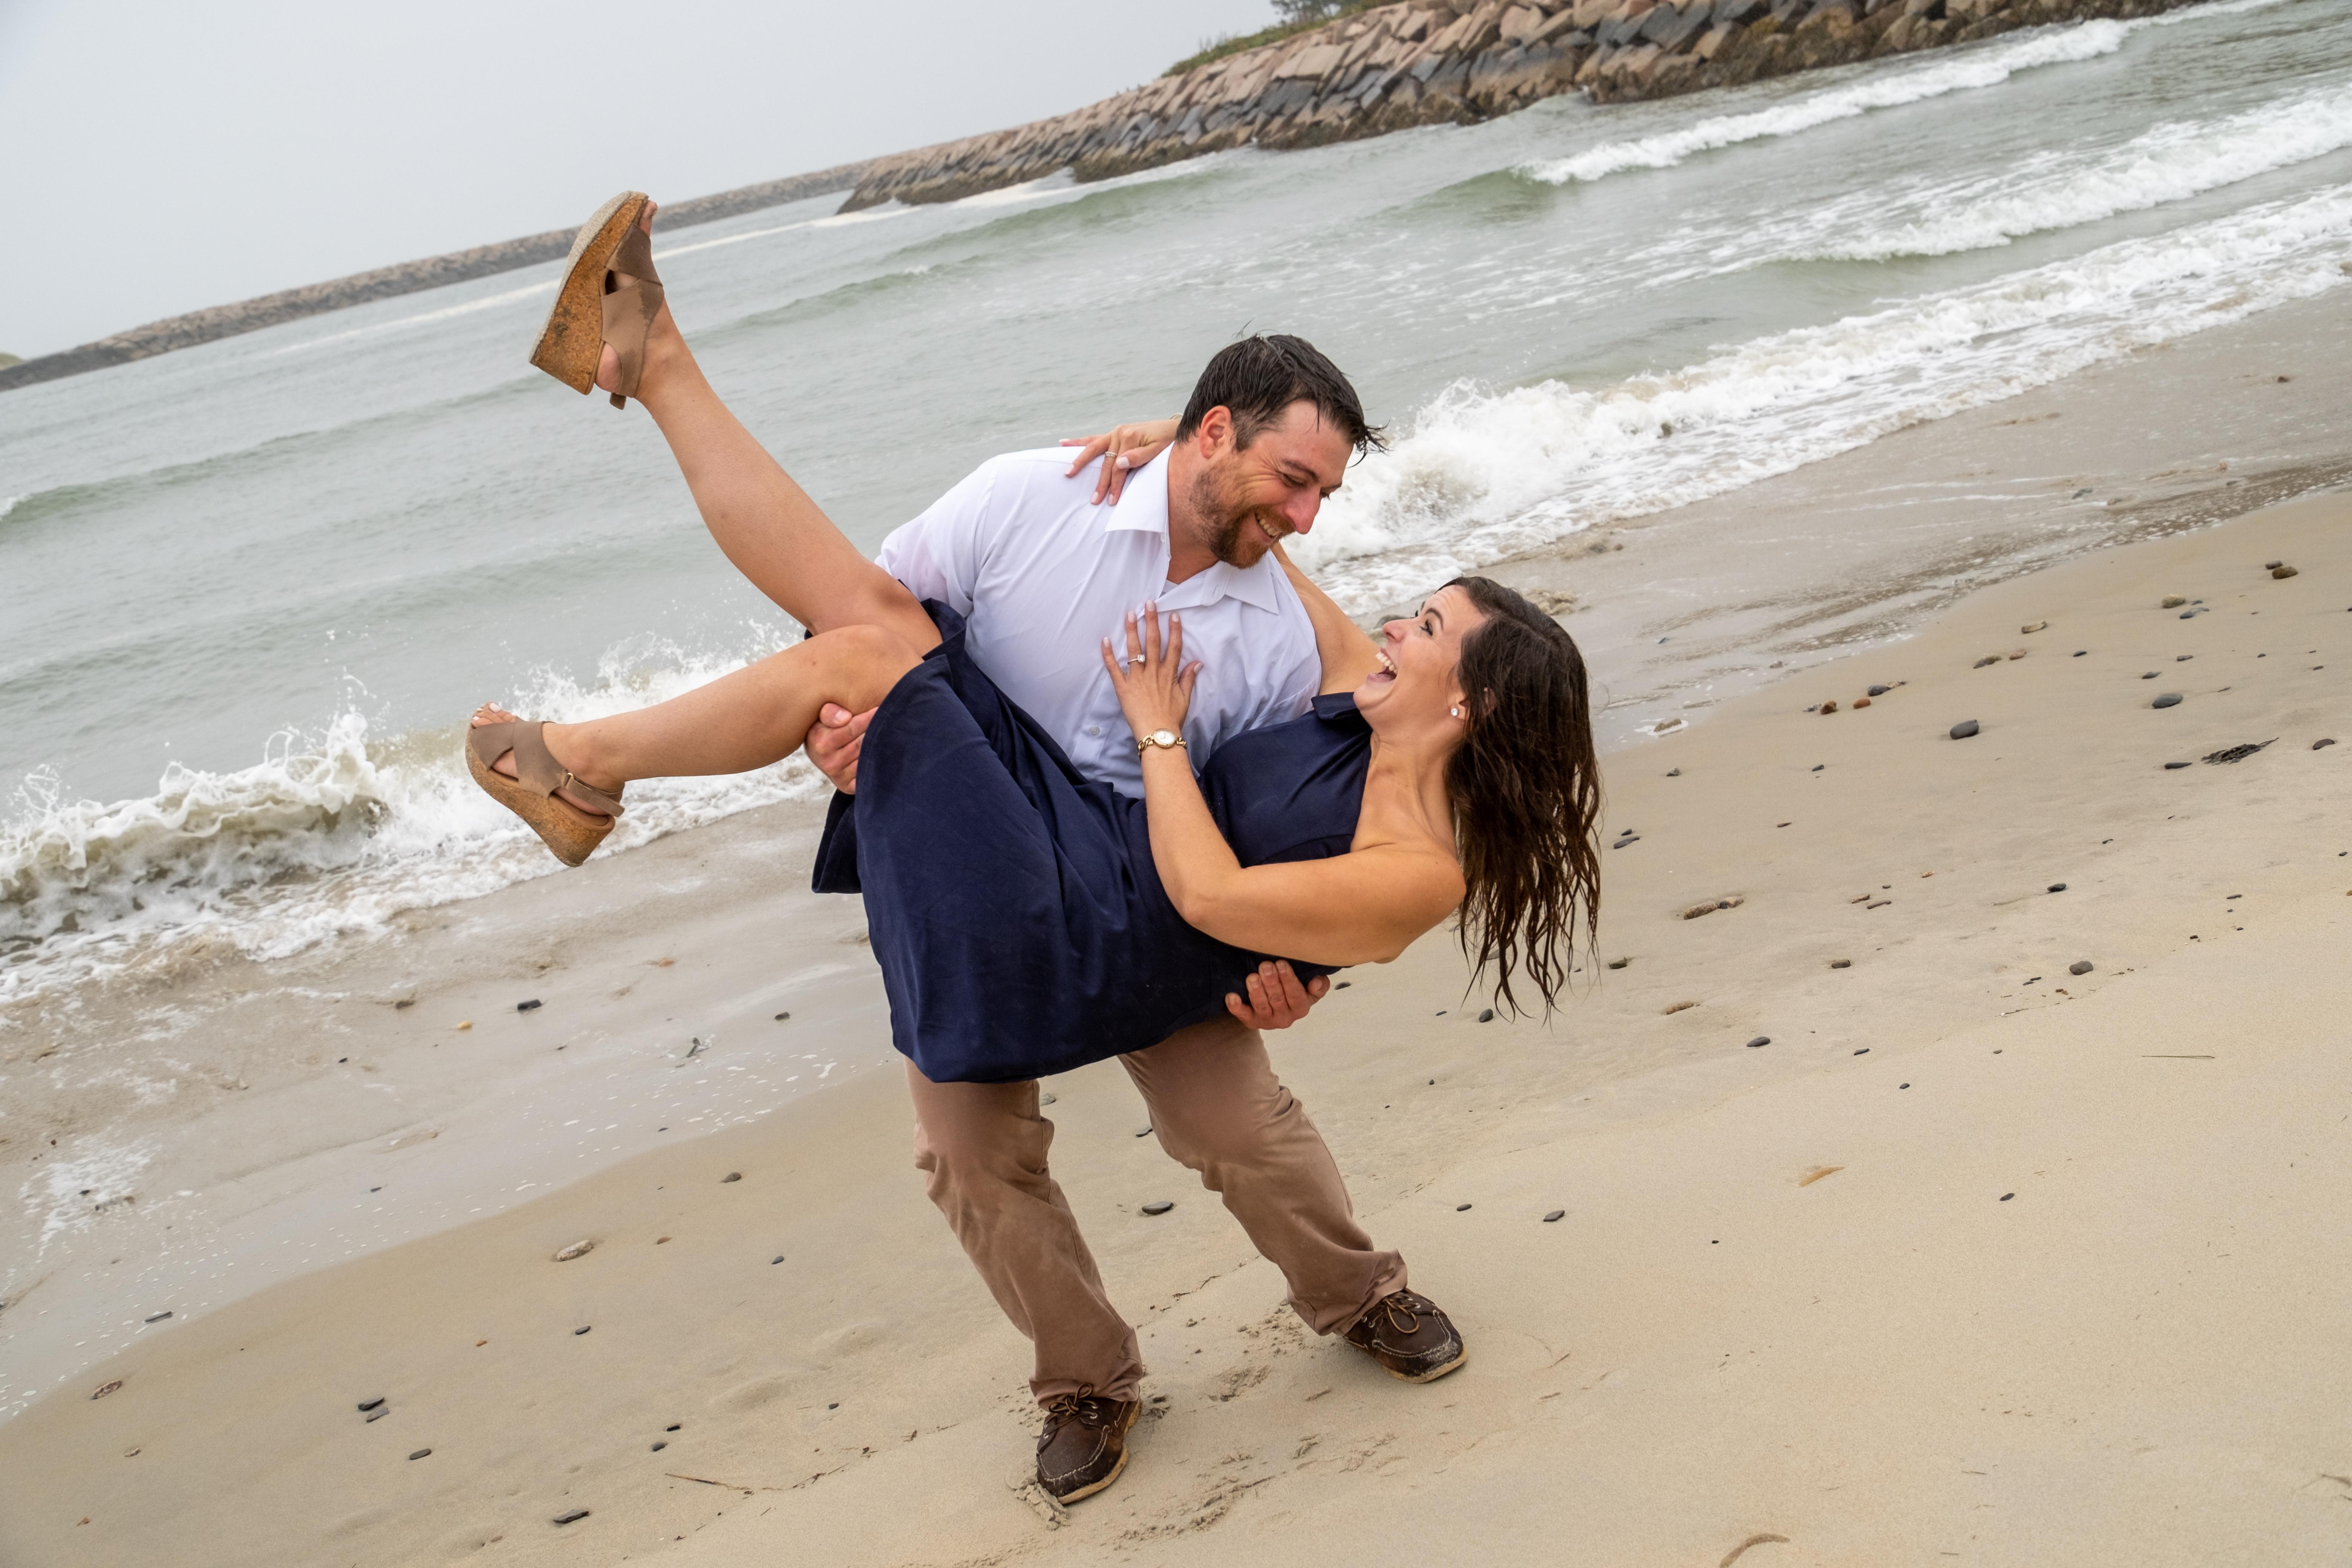 The Wedding Website of Kimberly Chapin and James Amato